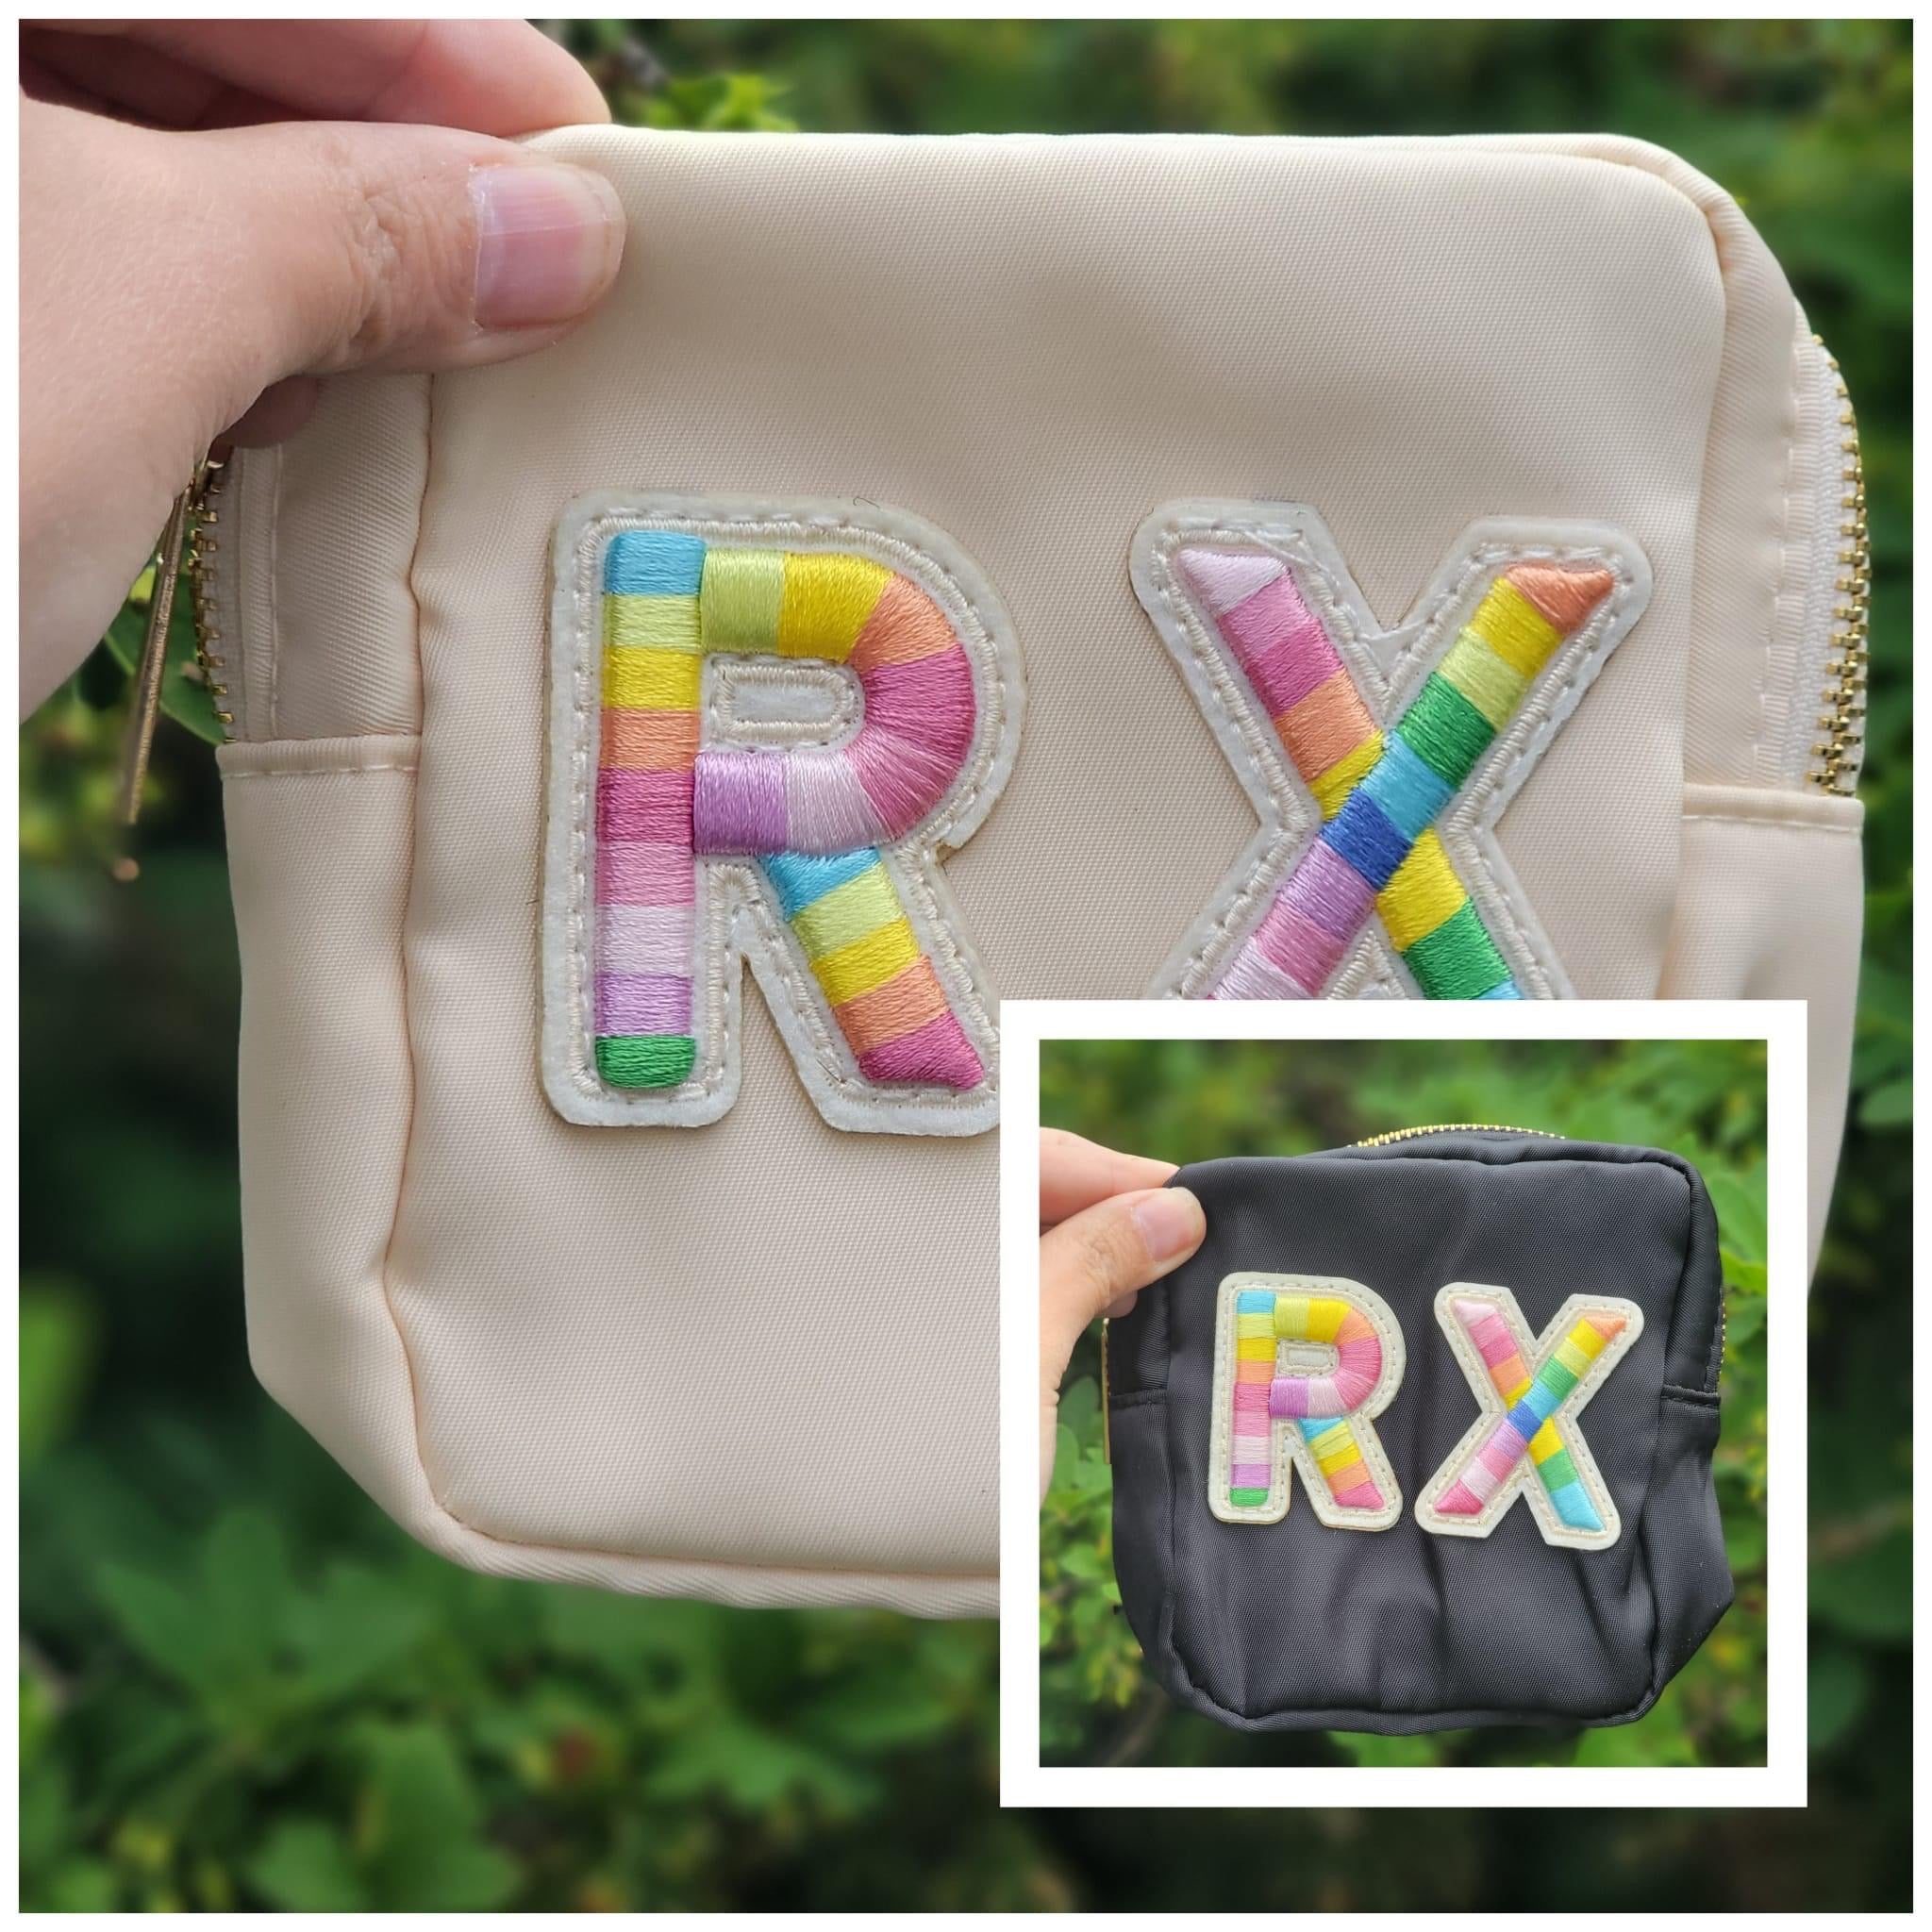 RX EMBROIDERED BAGS